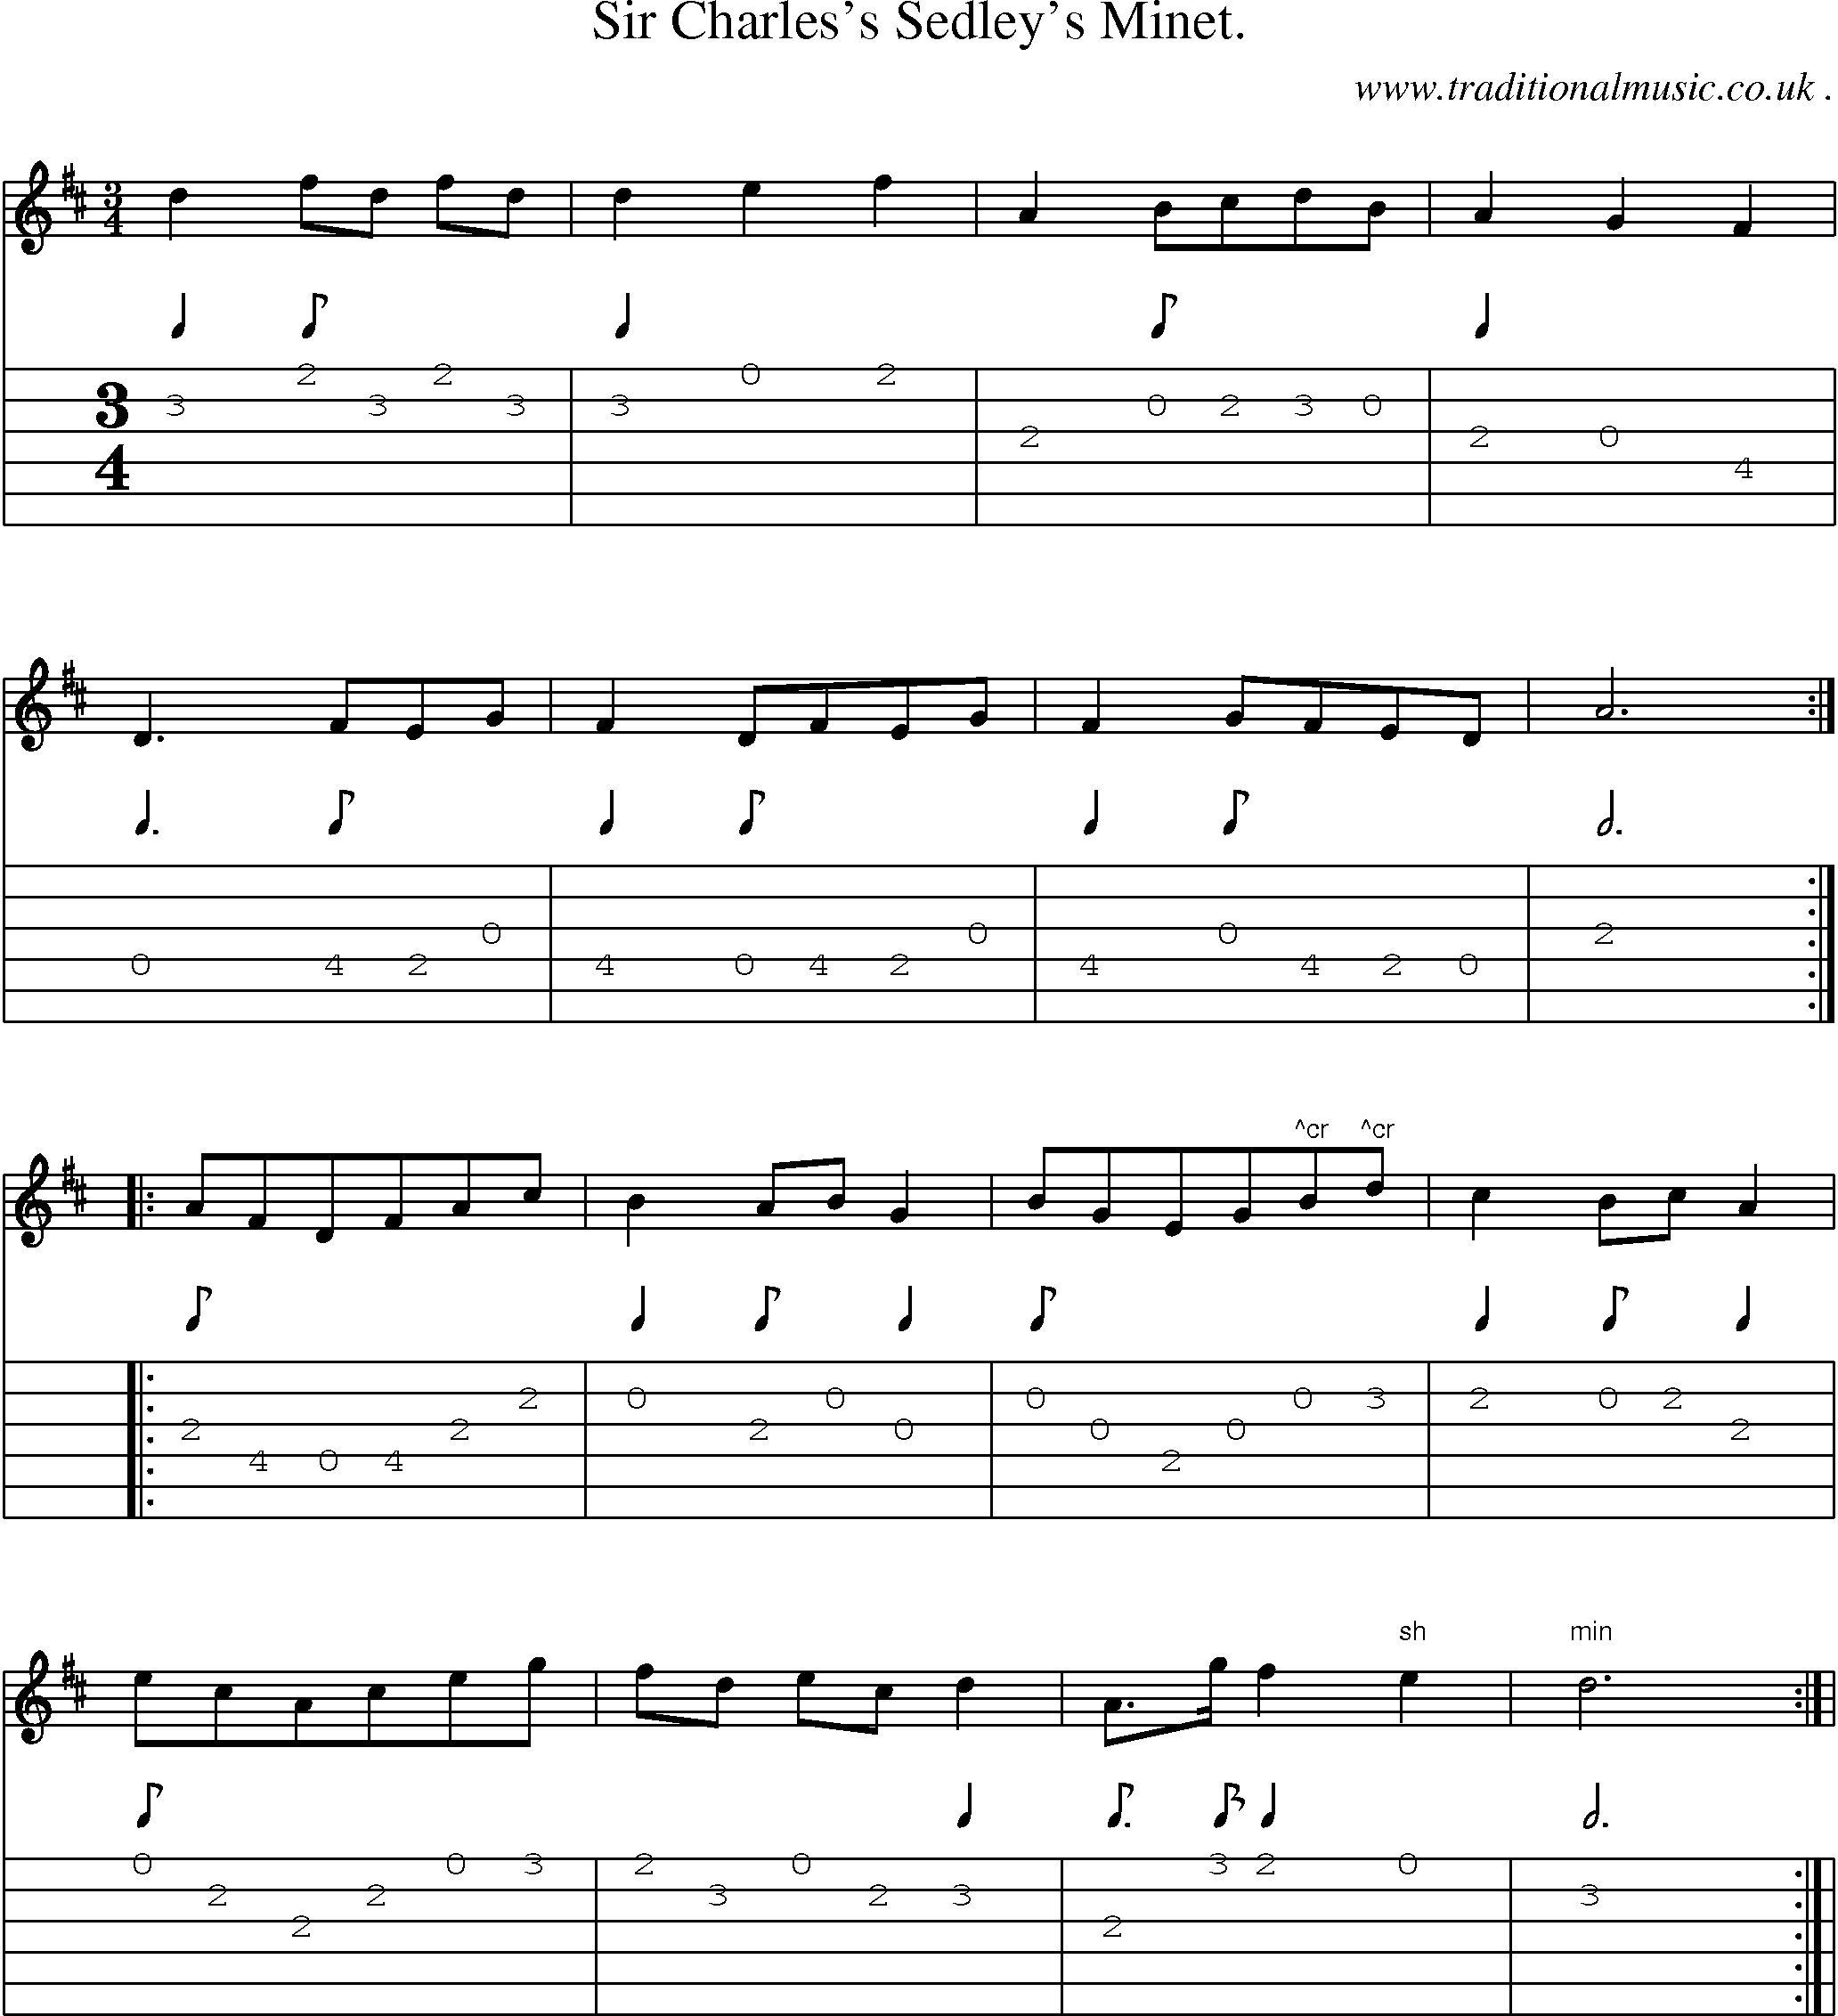 Sheet-Music and Guitar Tabs for Sir Charless Sedleys Minet